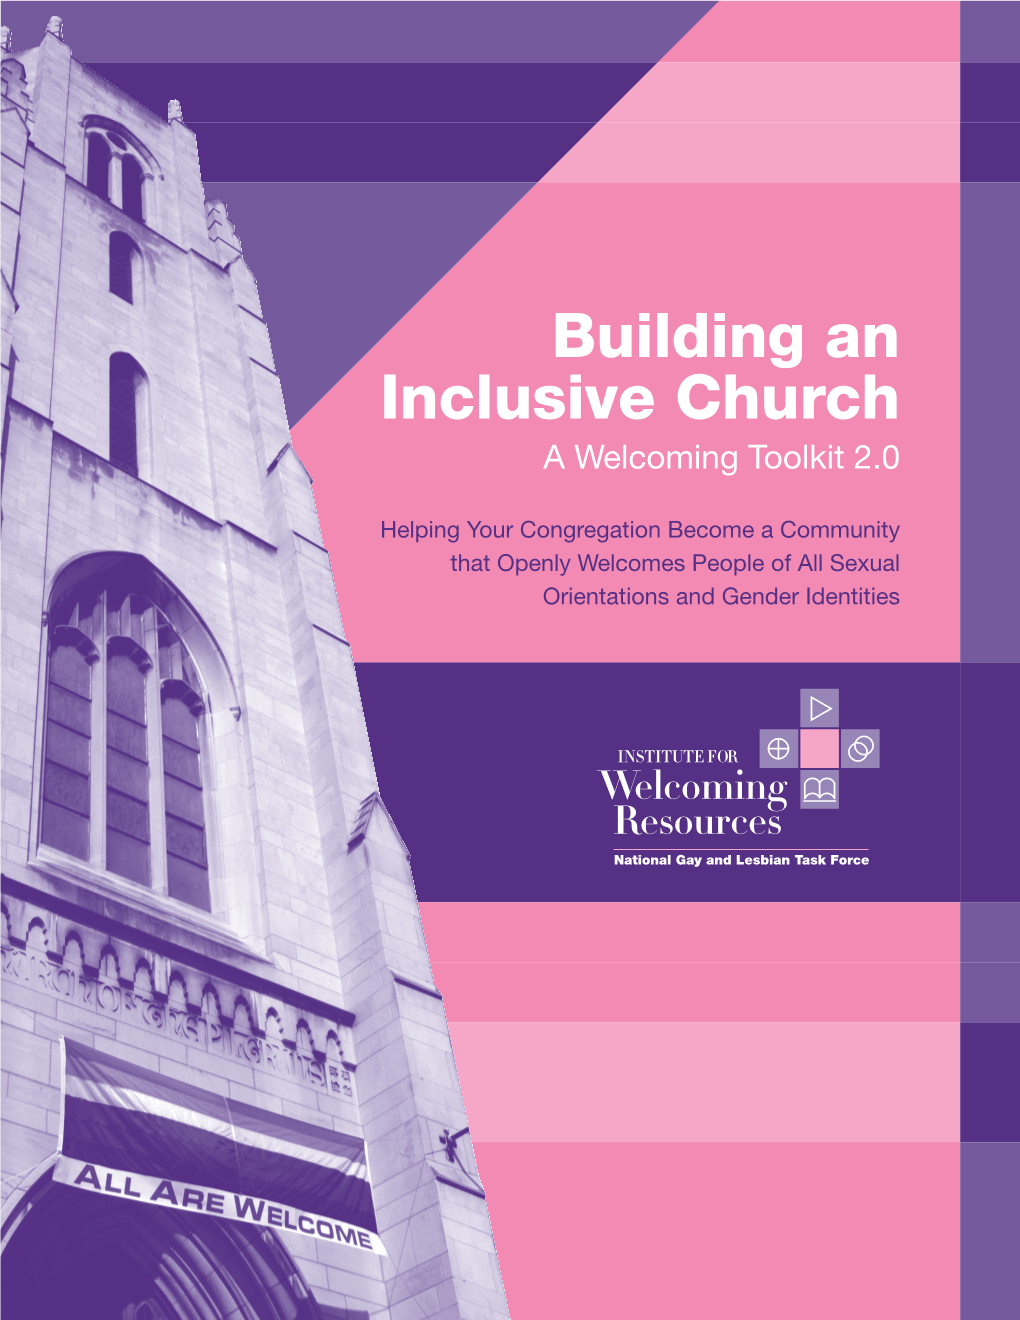 Building an Inclusive Church a Welcoming Toolkit 2.0